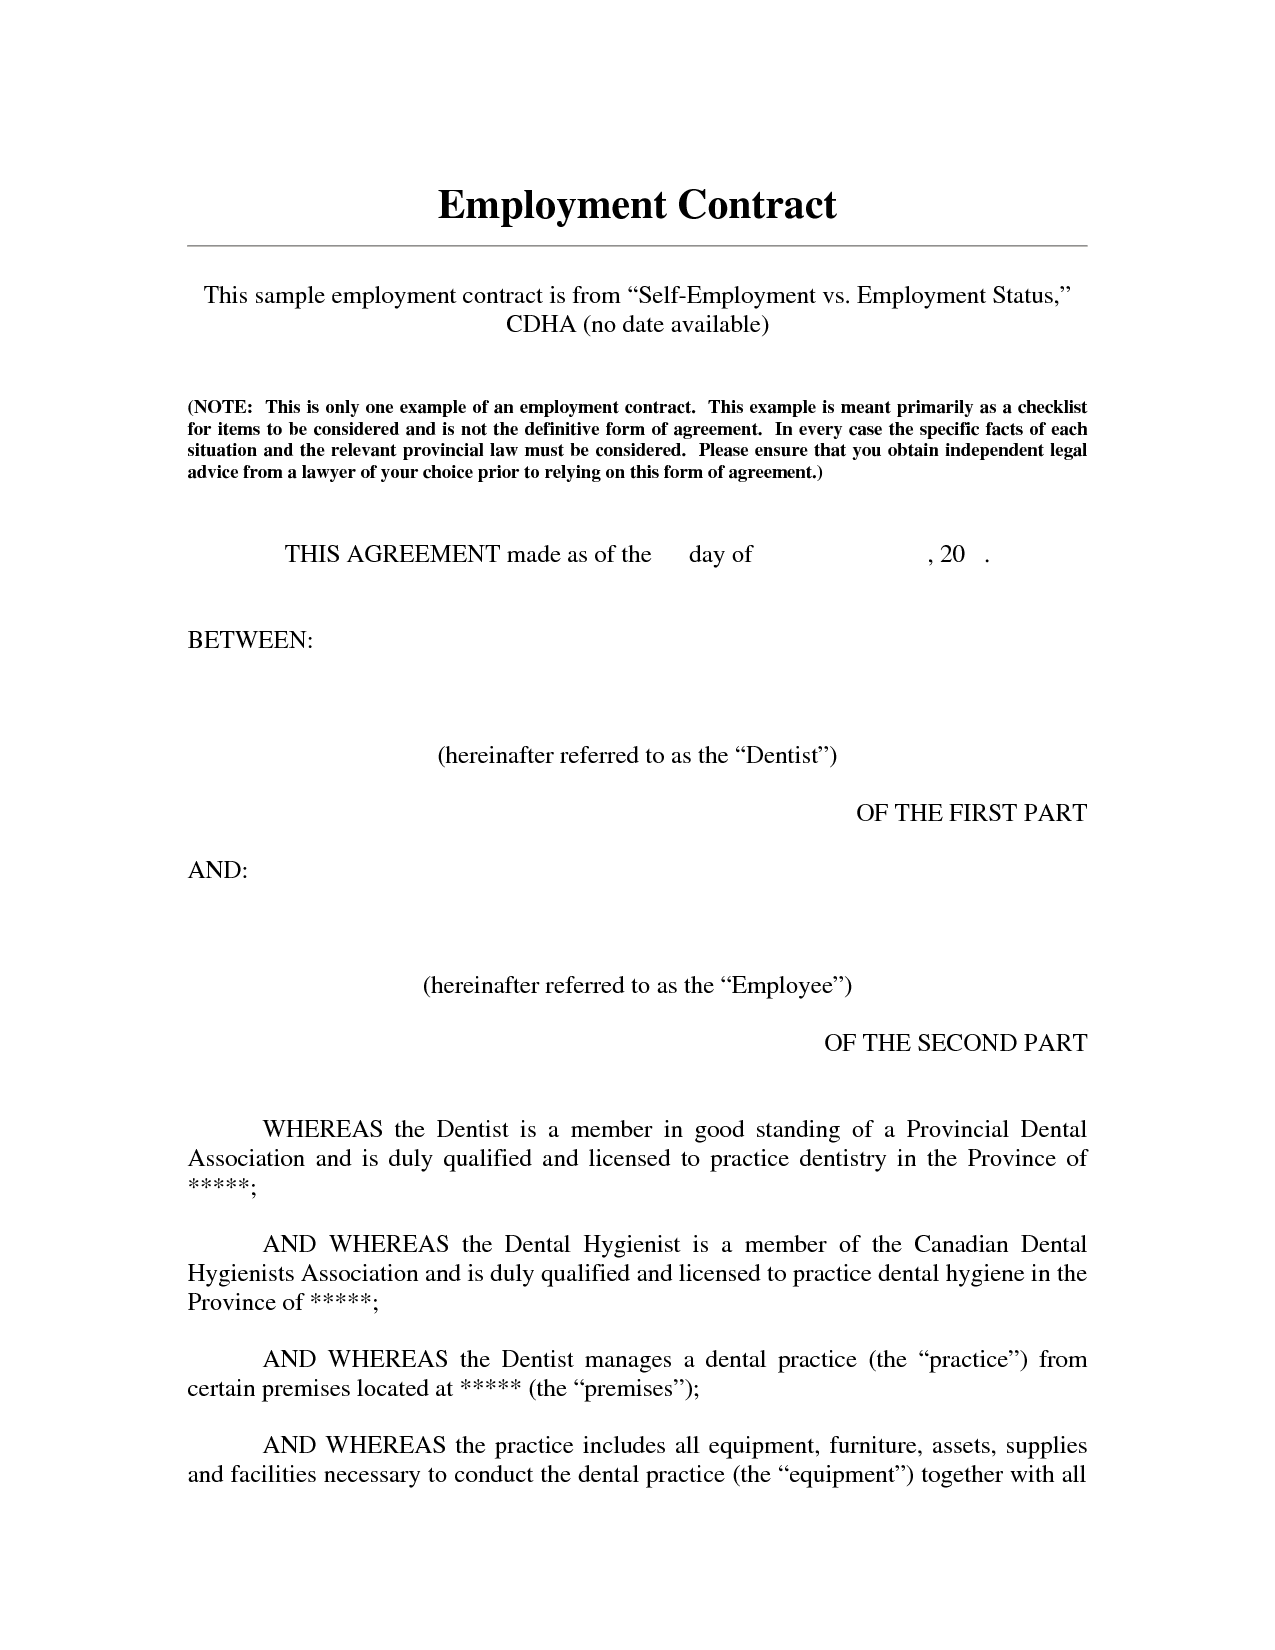 employment-contract-example-free-printable-documents